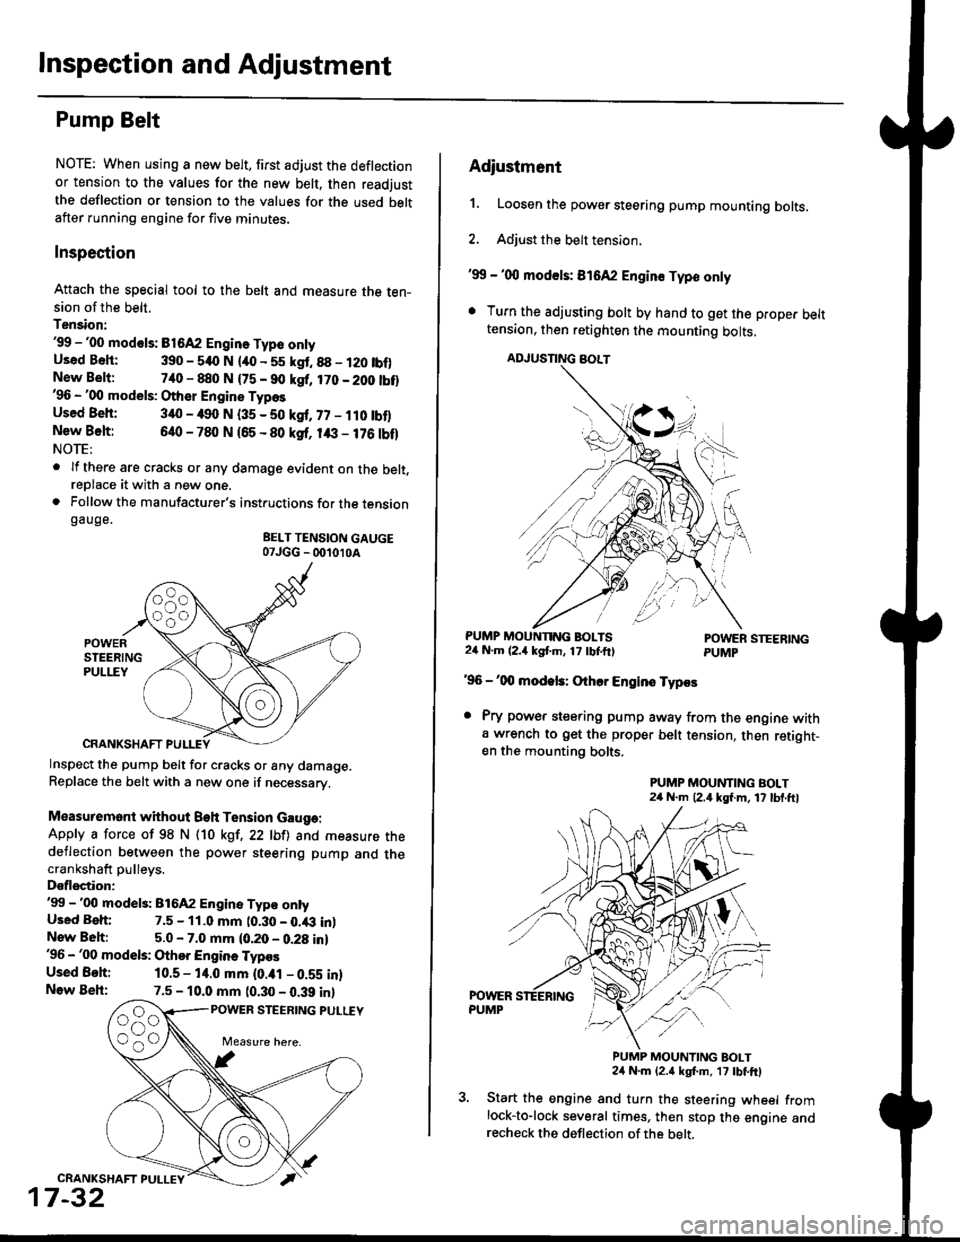 HONDA CIVIC 2000 6.G Workshop Manual Inspection and Adjustment
Pump Belt
NOTE: When using a new belt, first adjust the deflection
or tension to the values for the new belt, then readjust
the deflection or tension to the values for the us